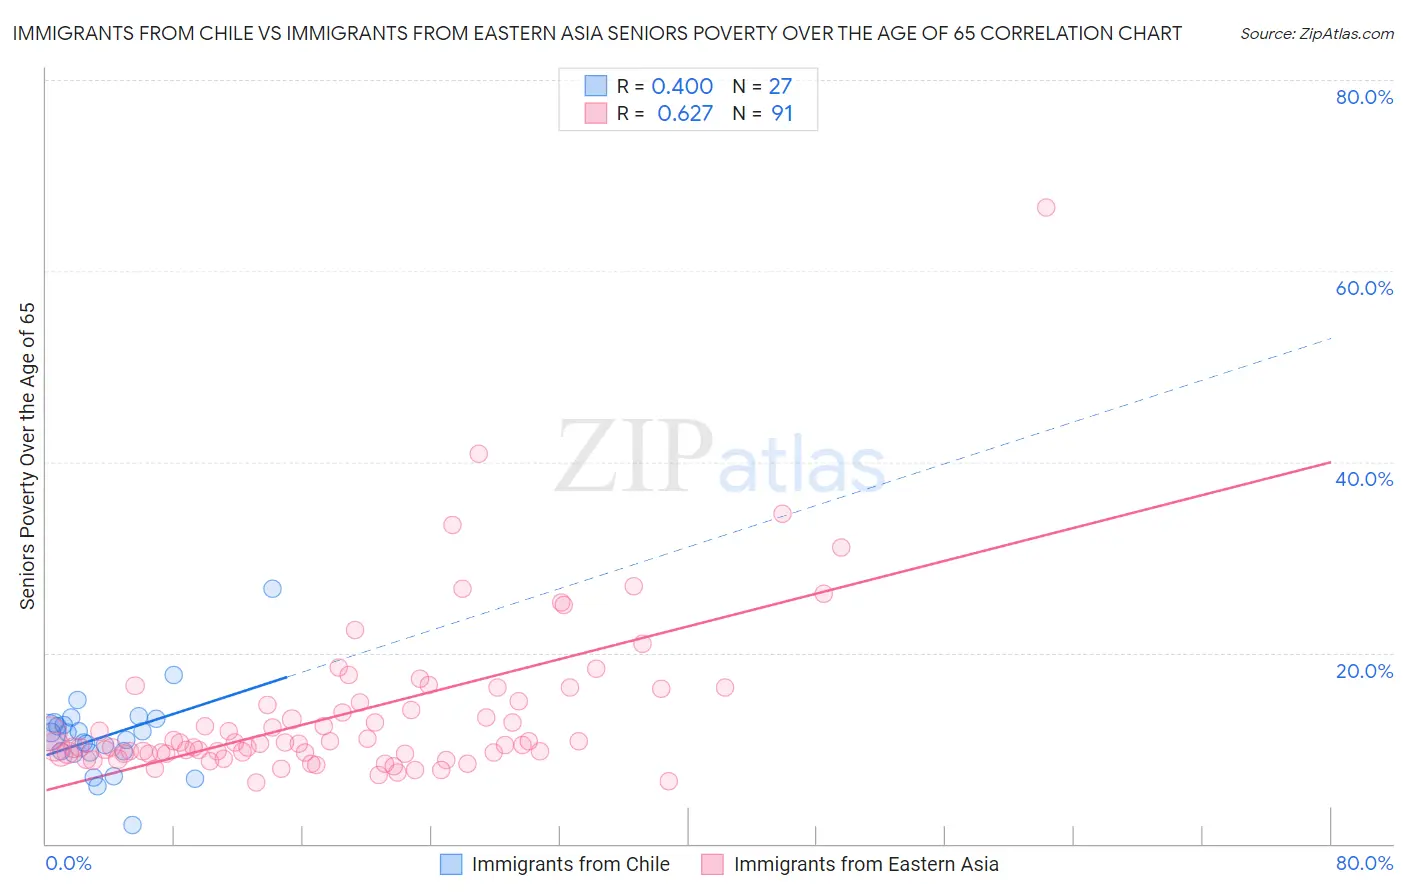 Immigrants from Chile vs Immigrants from Eastern Asia Seniors Poverty Over the Age of 65